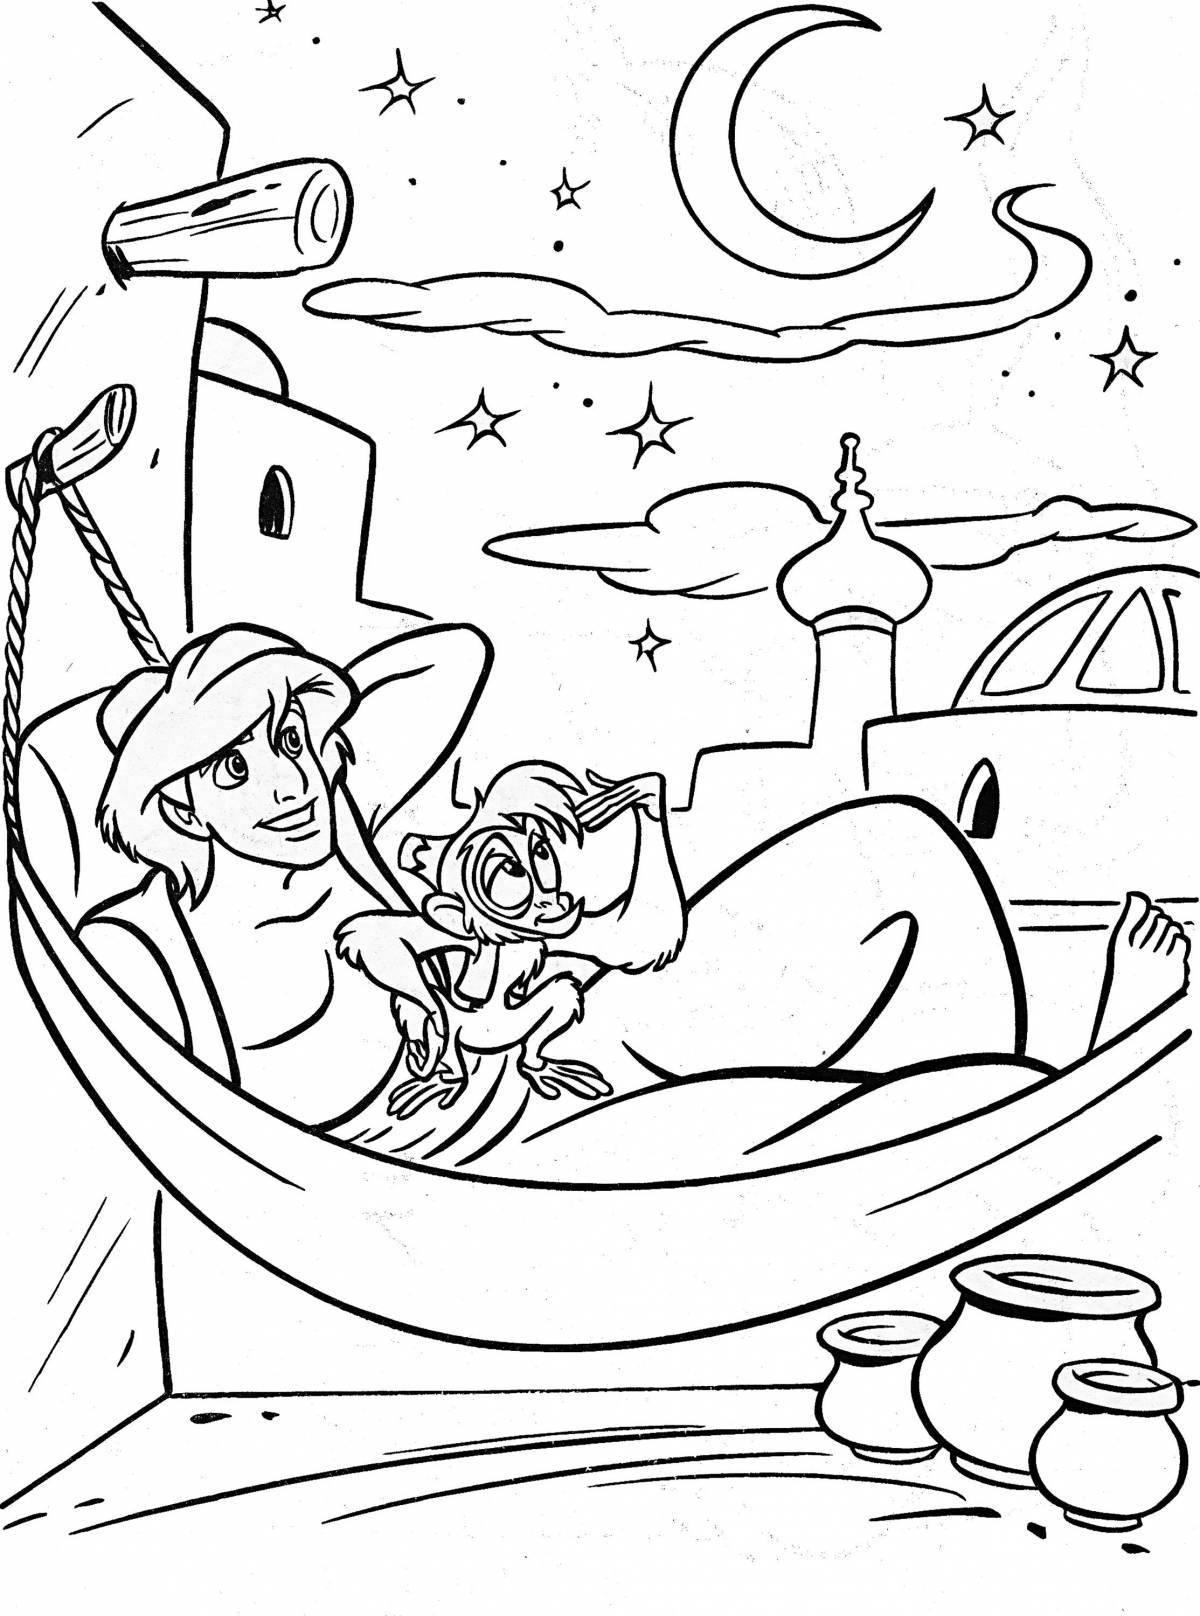 Aladdin's gorgeous coloring book